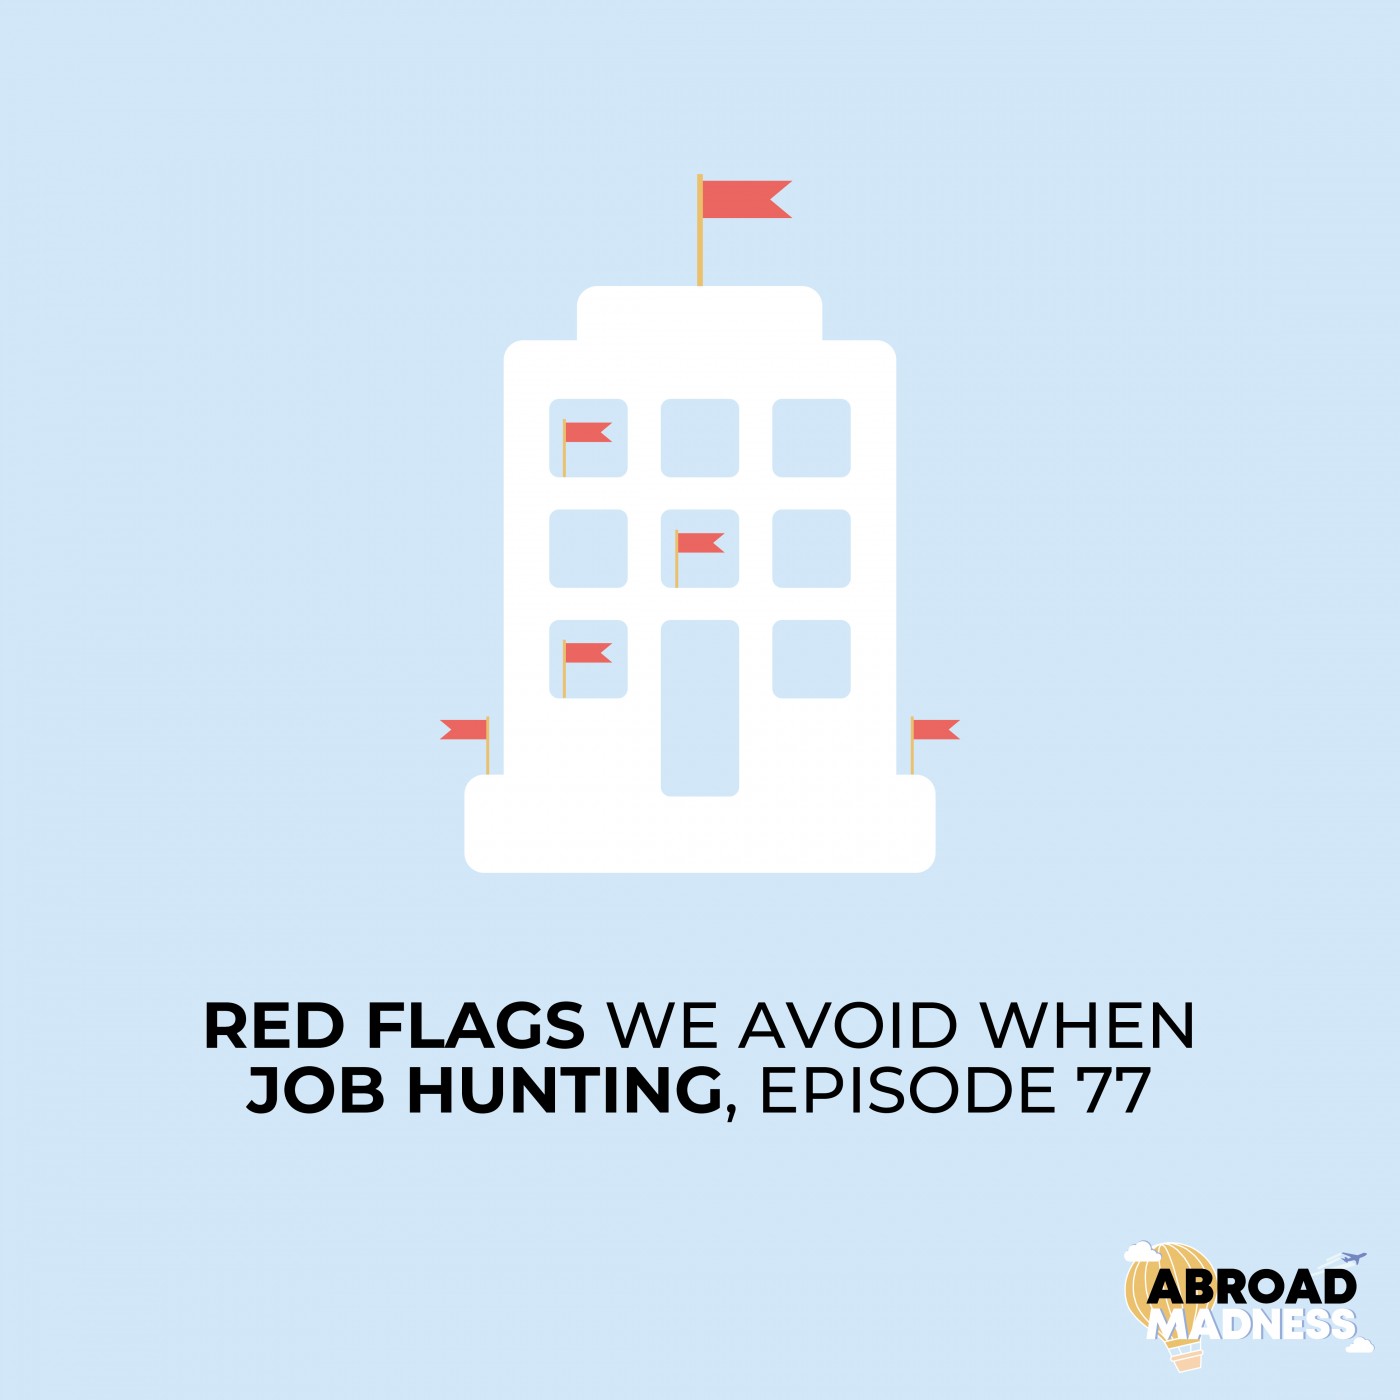 Red Flags we avoid when Job Hunting, Episode 77